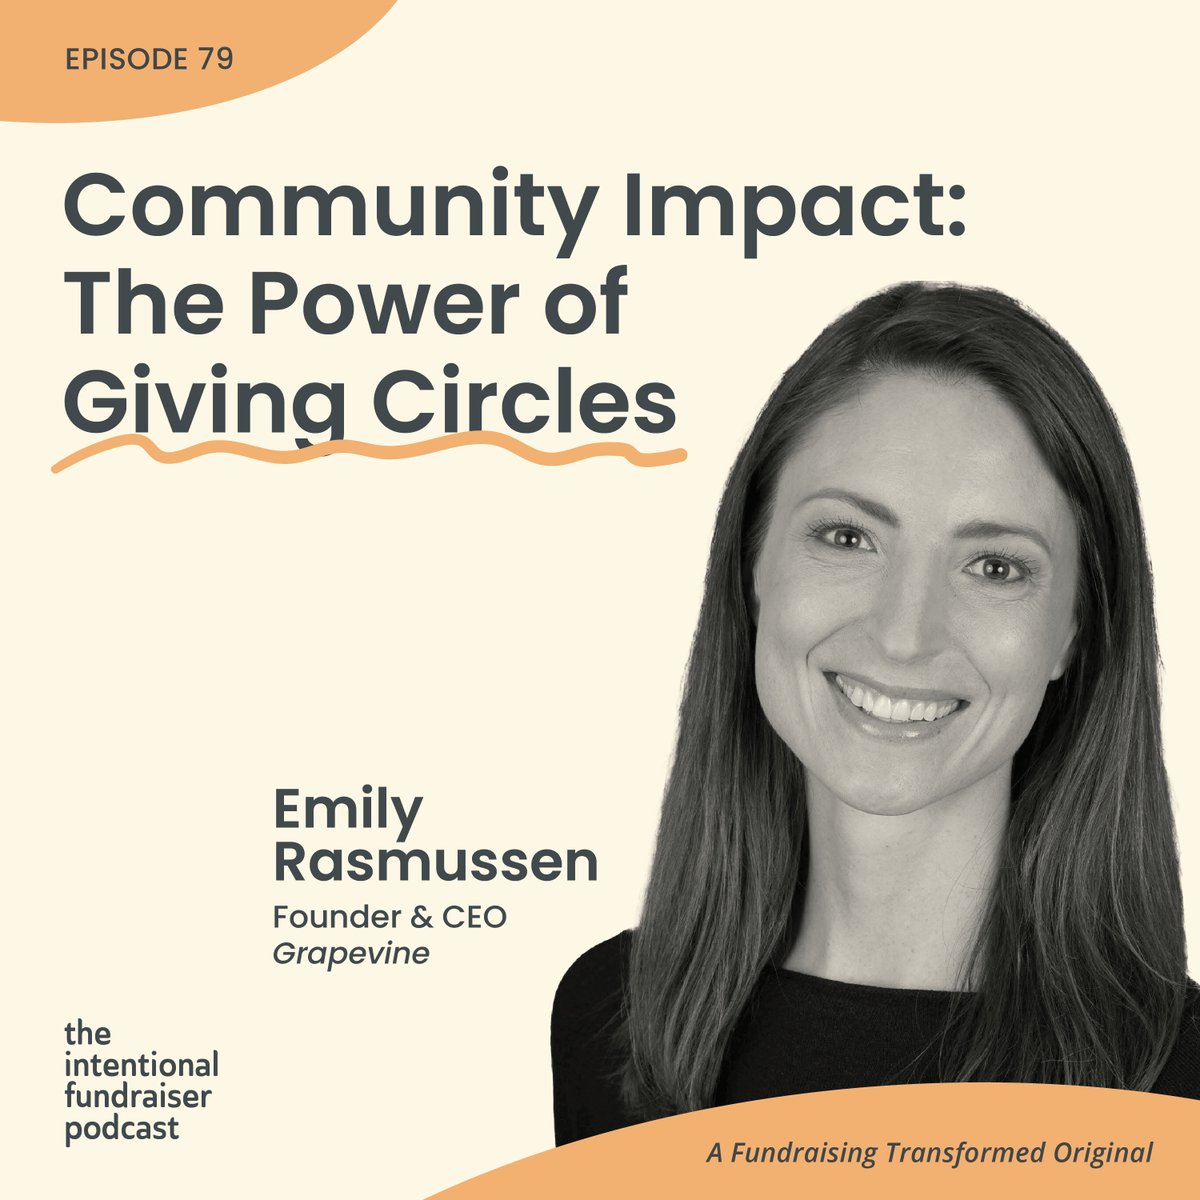 Don't miss out on valuable insights from @em_rasmussen on giving circles! Learn how to build meaningful connections, overcome challenges, and drive positive change in your community. Listen now at bit.ly/3TtBzMl! 🌟 #GivingCircles #CommunityImpact